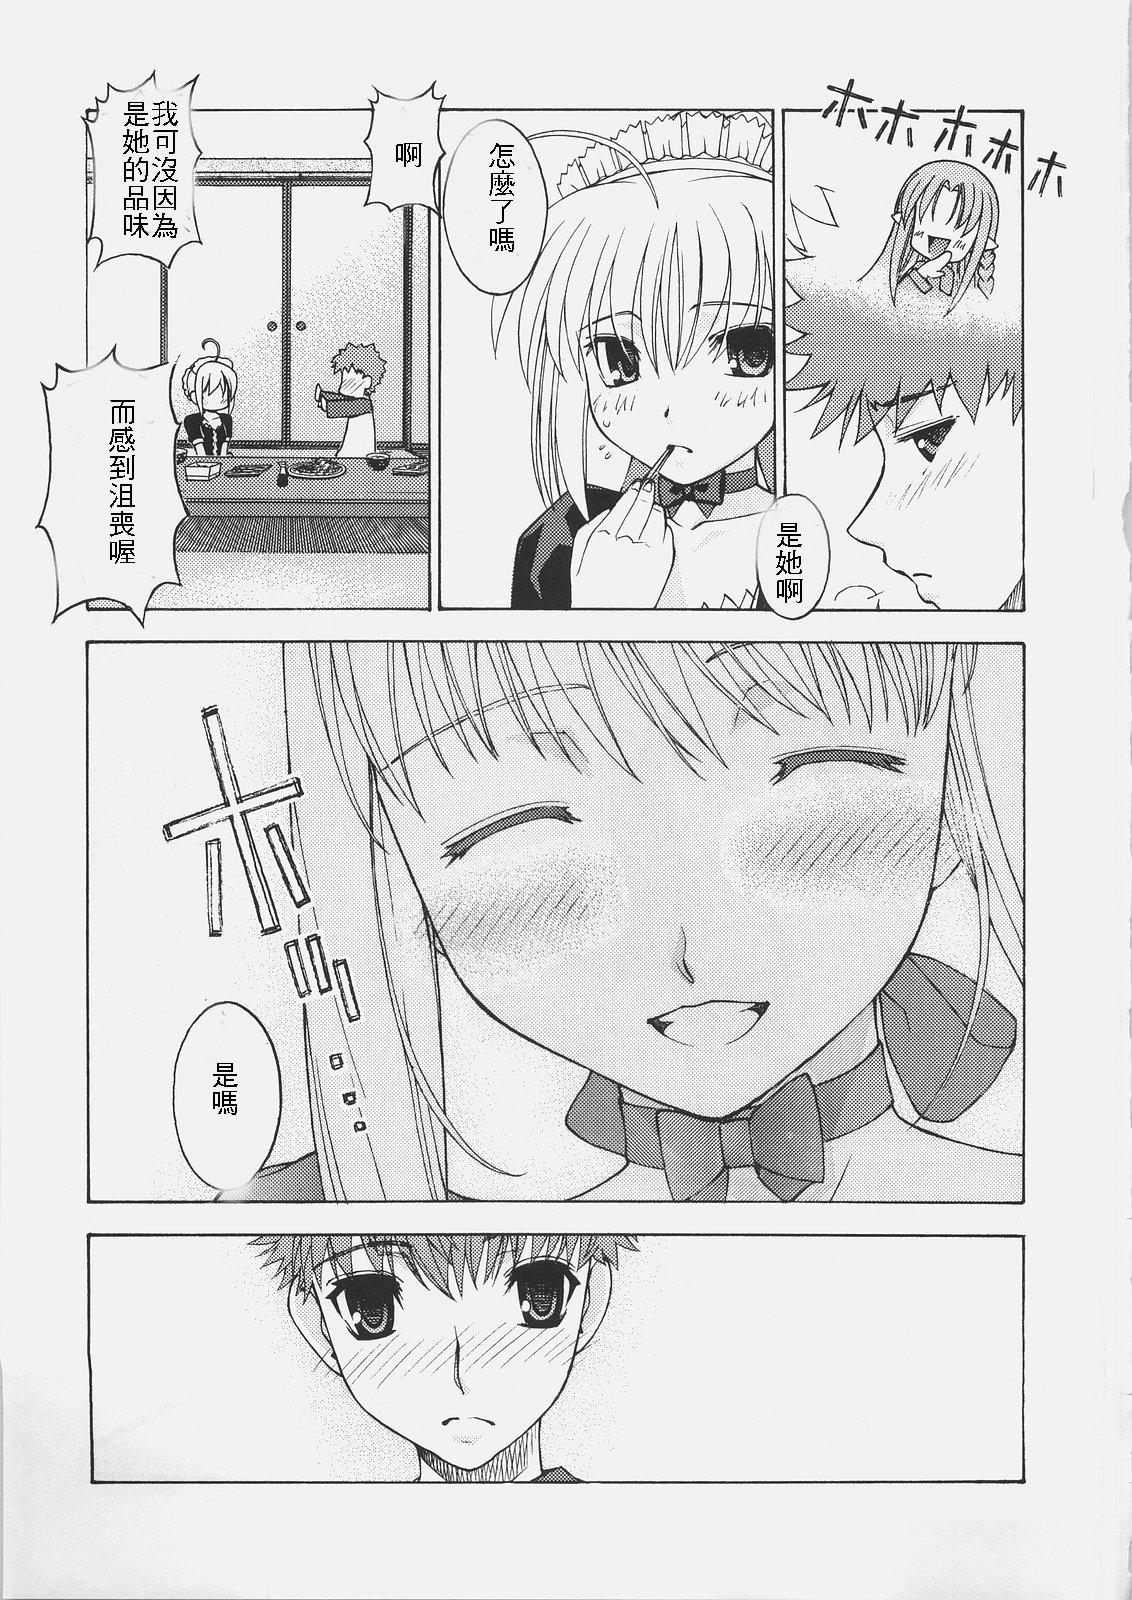 Toy HUNGRY LOVER - Fate stay night Taiwan - Page 7